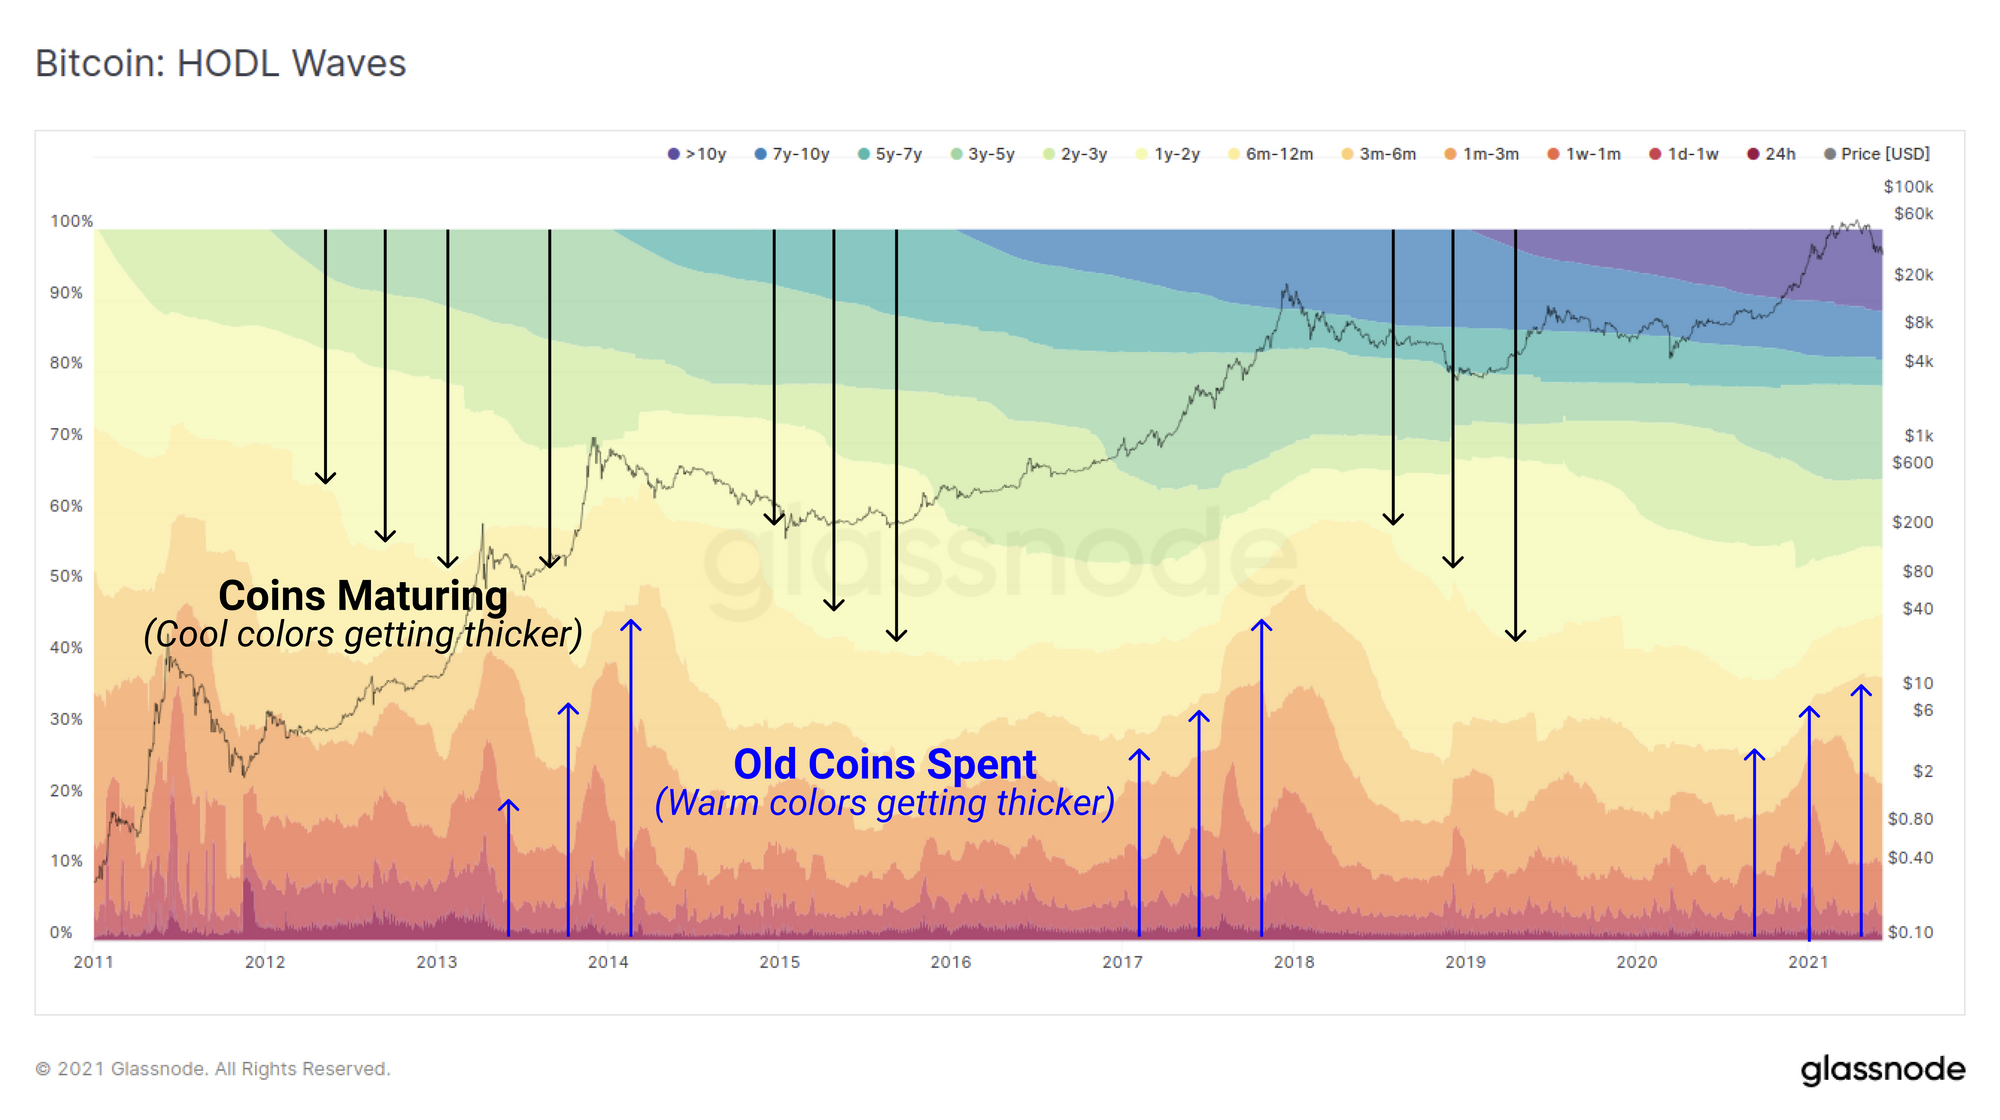 Bitcoin's On-chain Market Cycles